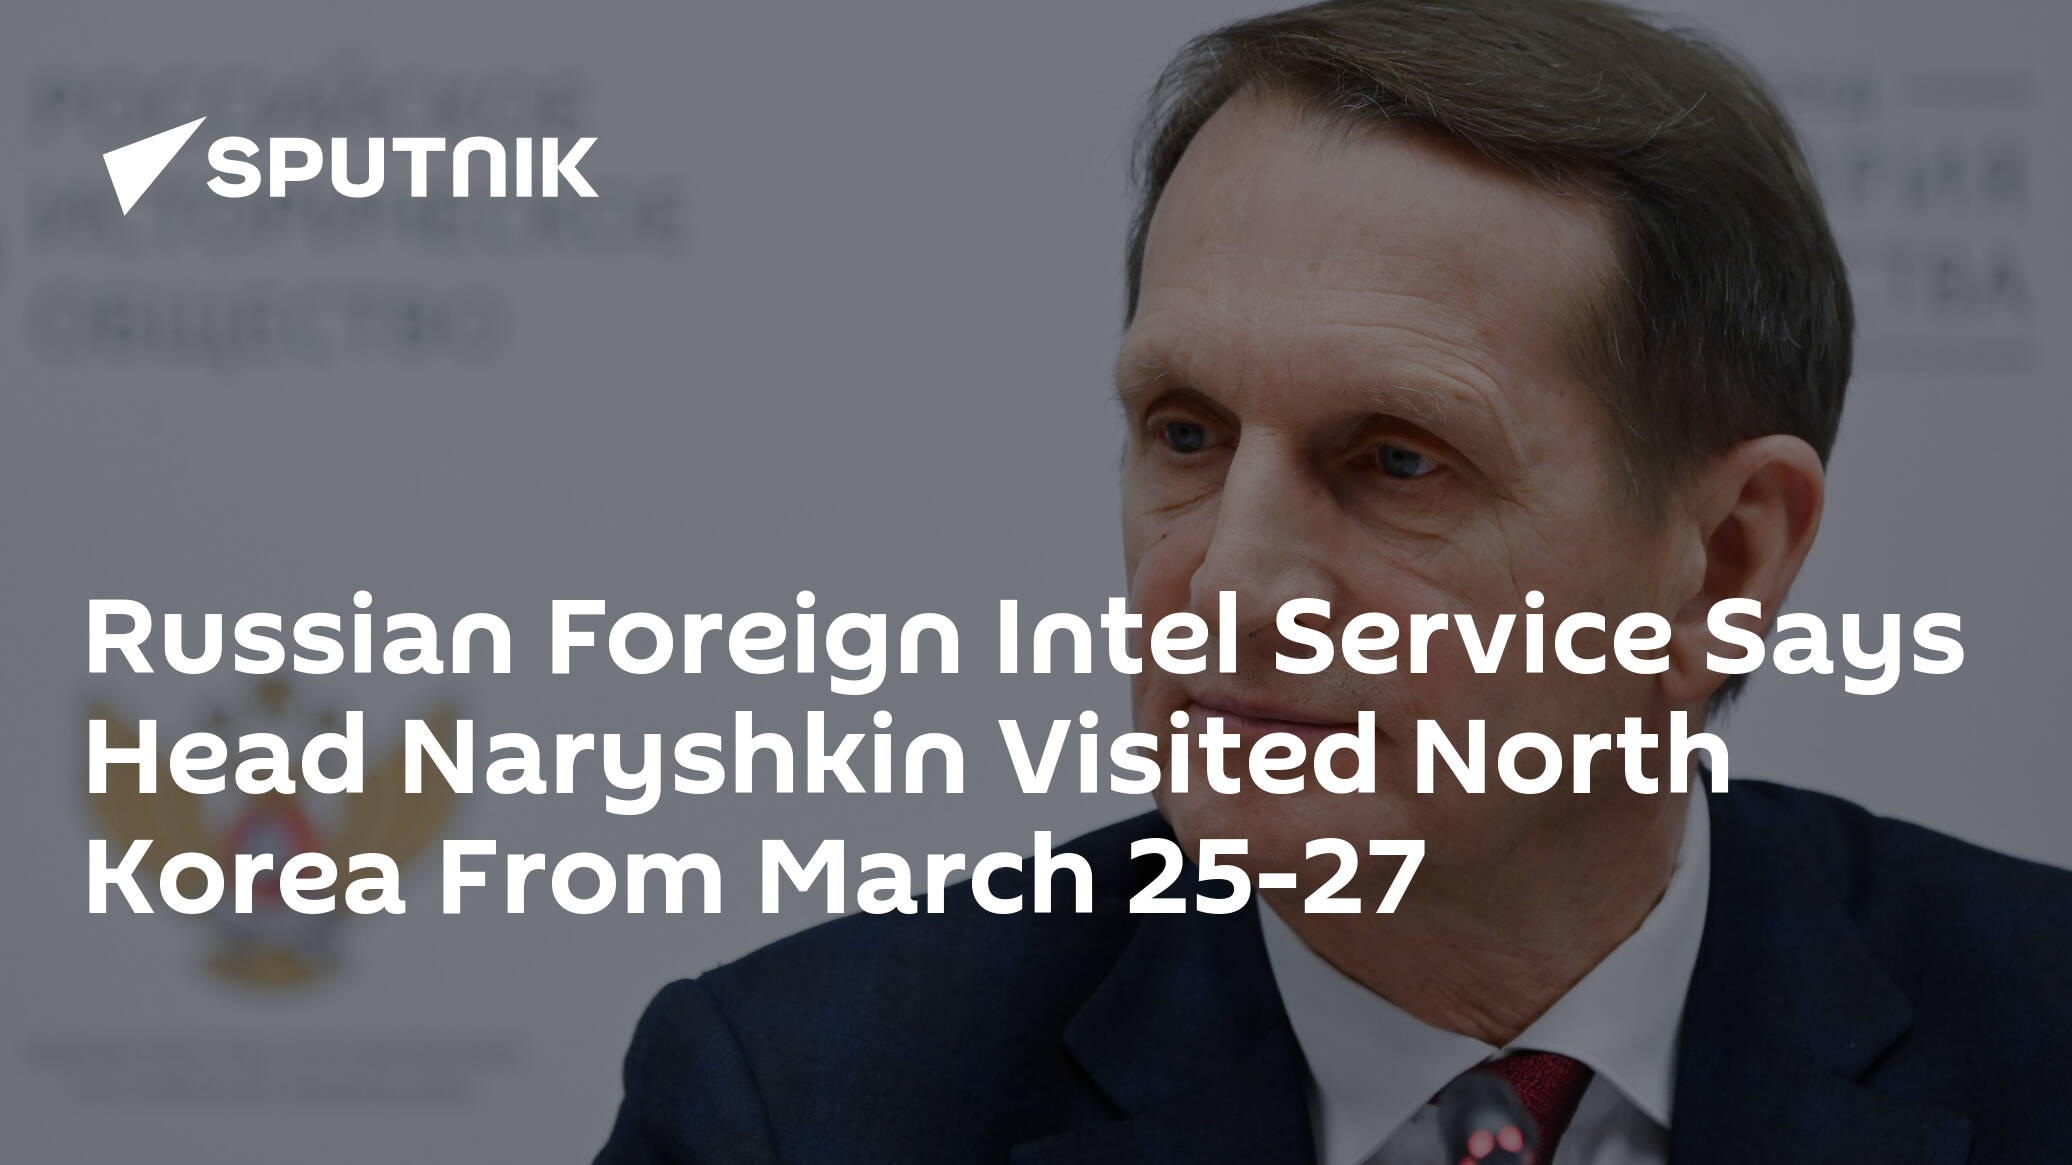 Russian Foreign Intel Service Says Head Naryshkin Visited North Korea From March 25-27